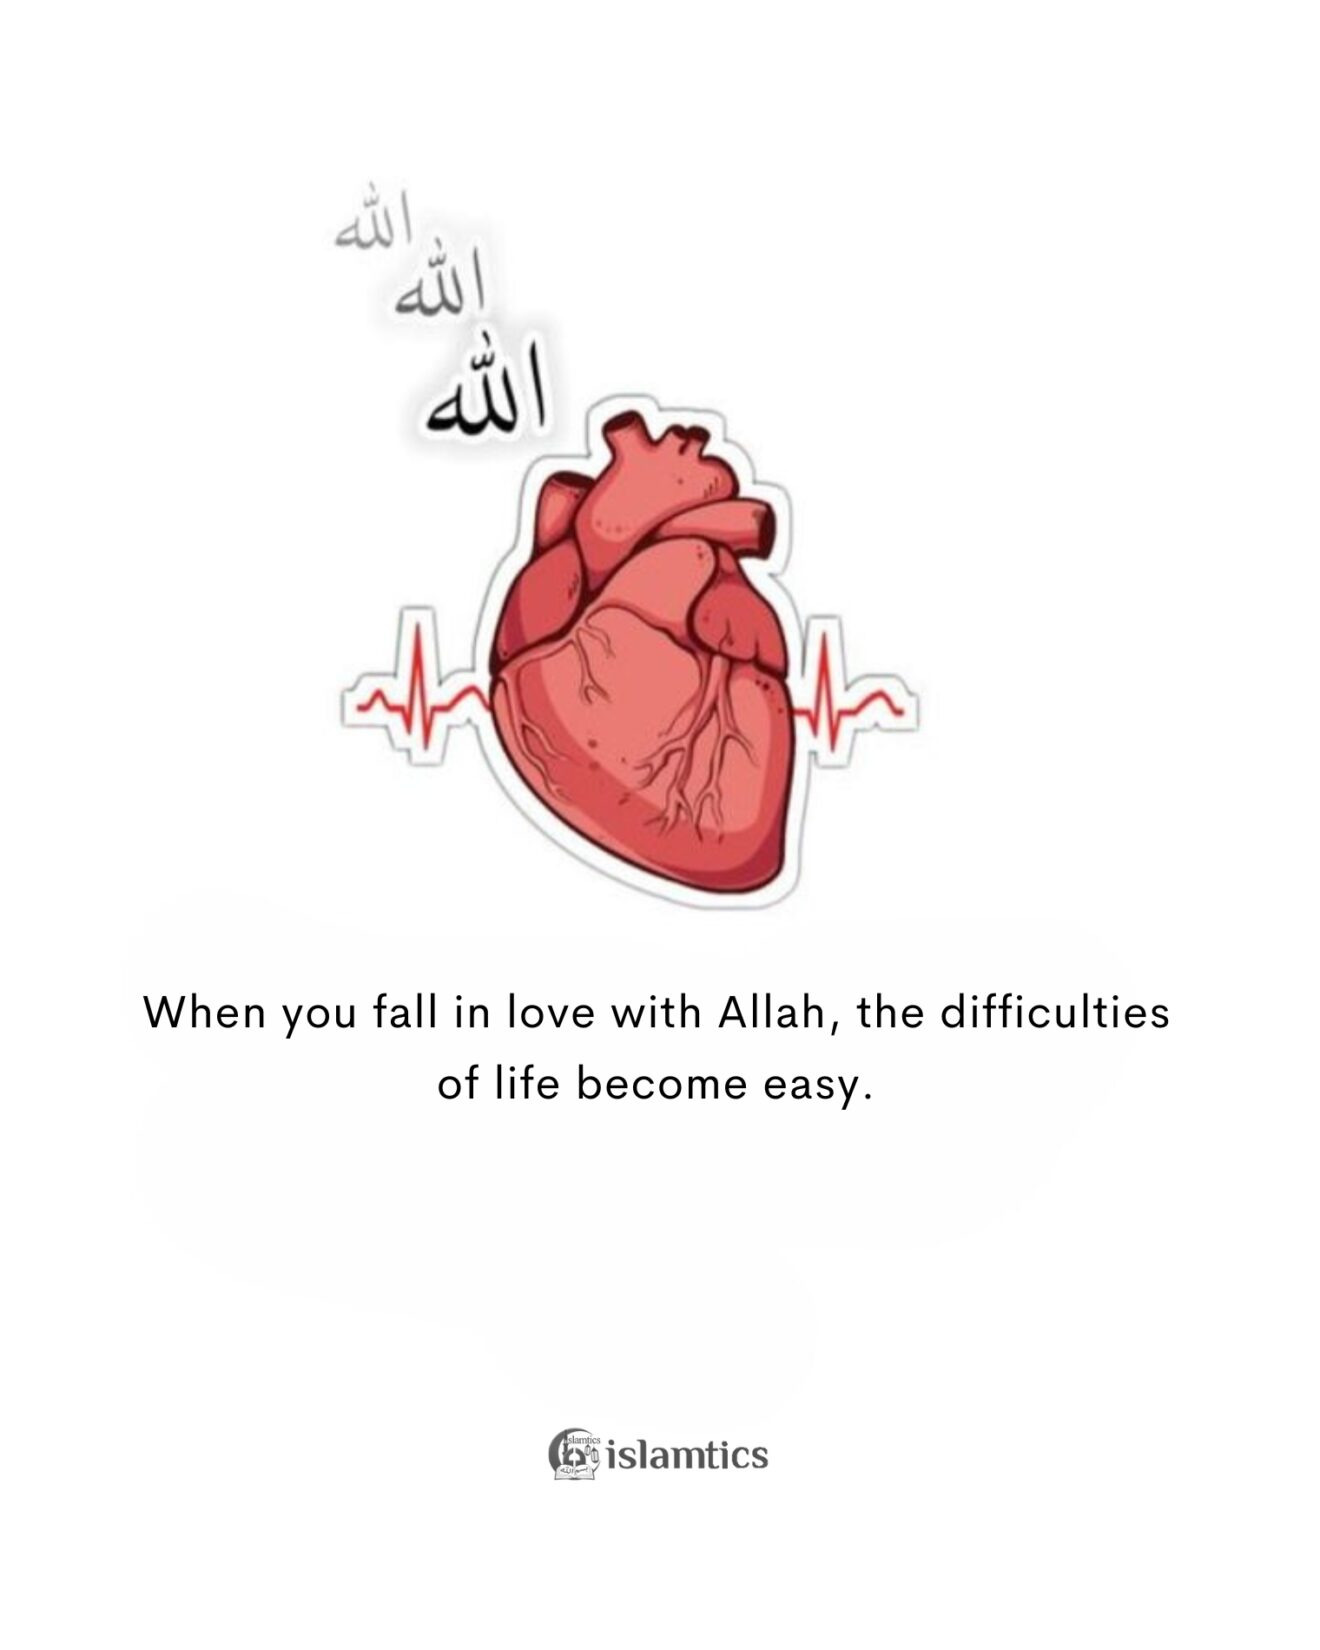 When you fall in love with Allah, life’s difficulties become easy.